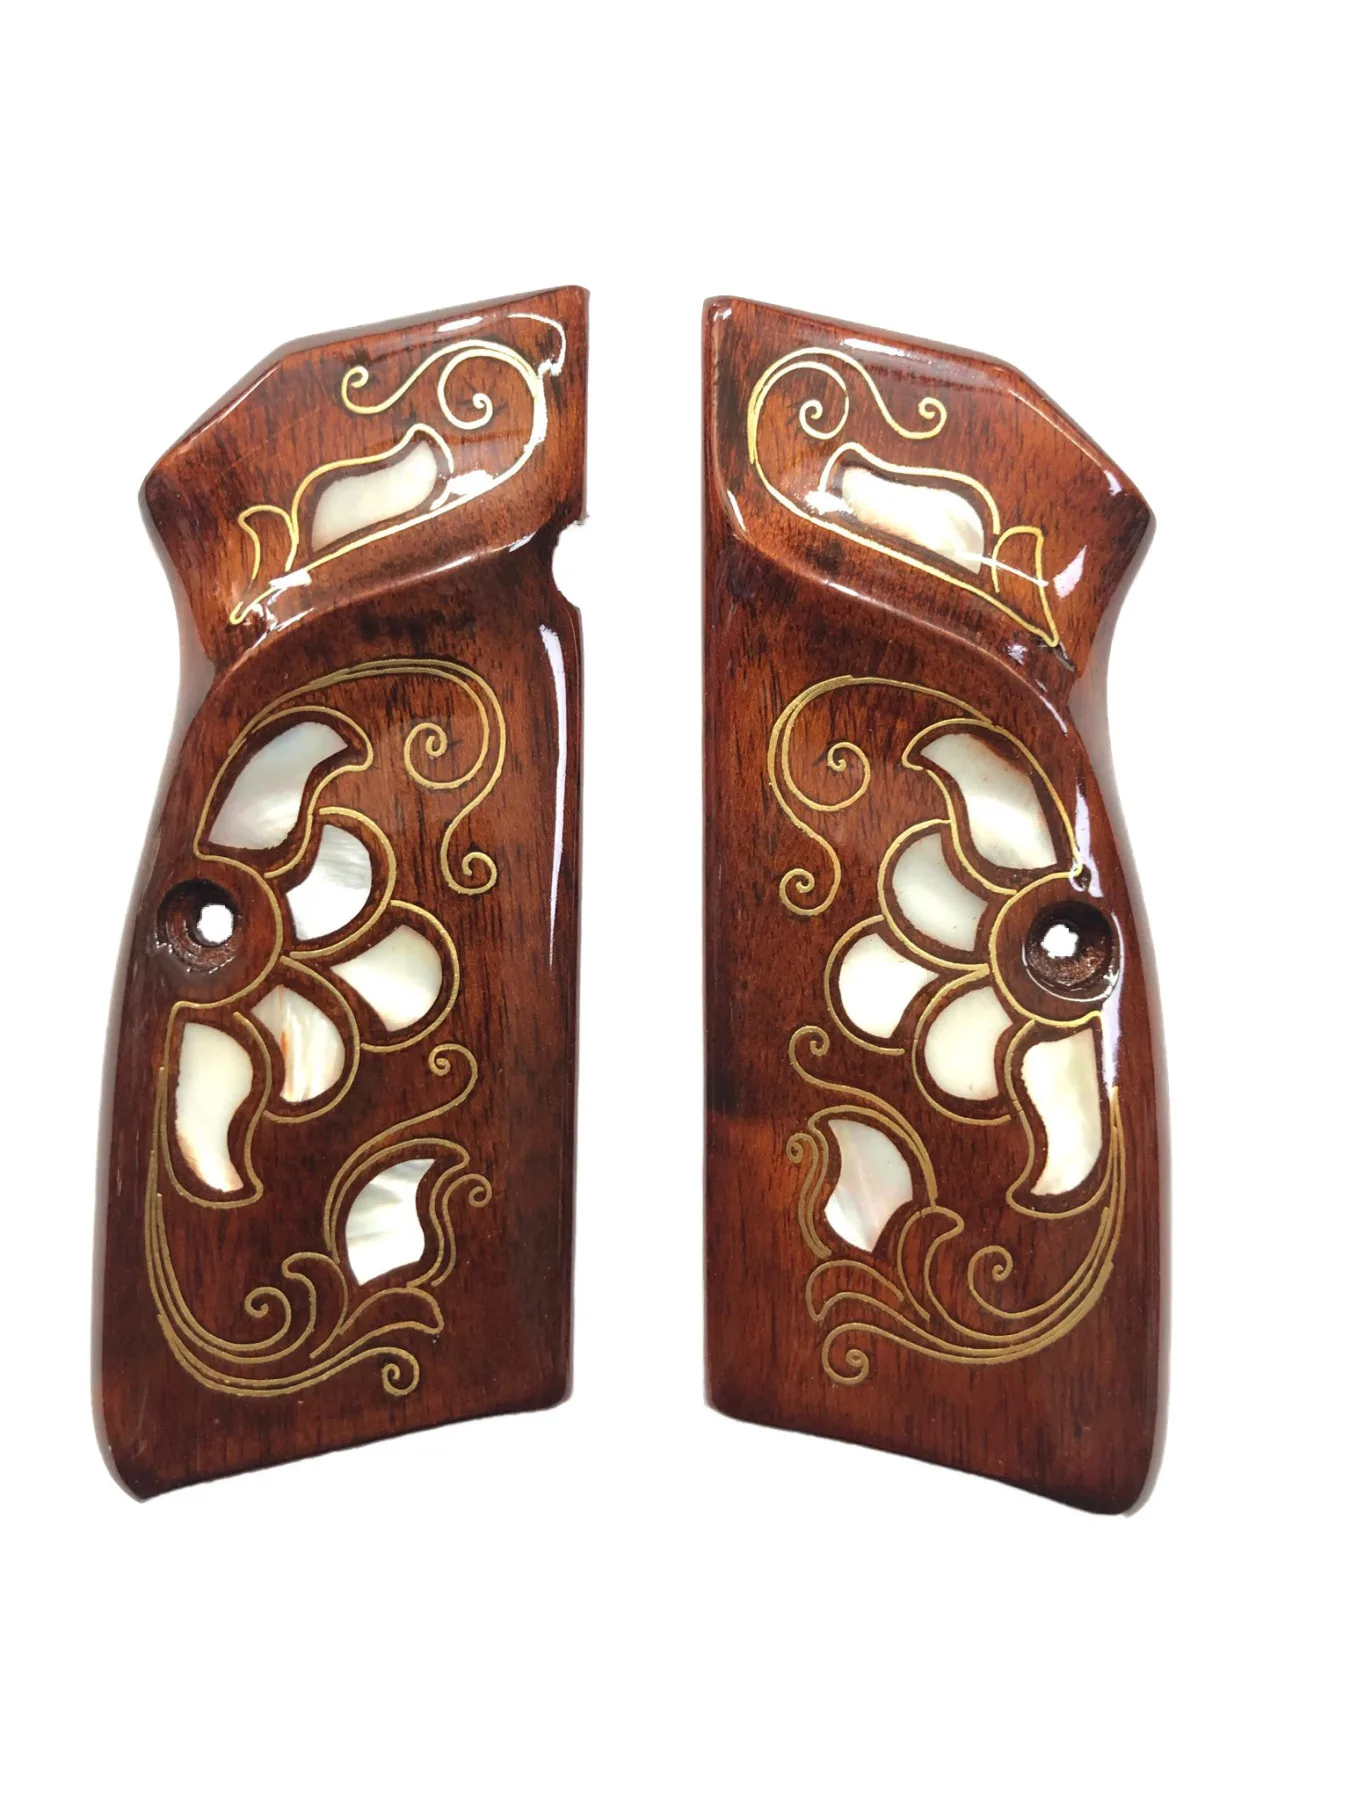 

Belgium Browning Hp 14 Compatible Special Series Laser Cutting Pearl Inlaid Wooden Grip Mod38